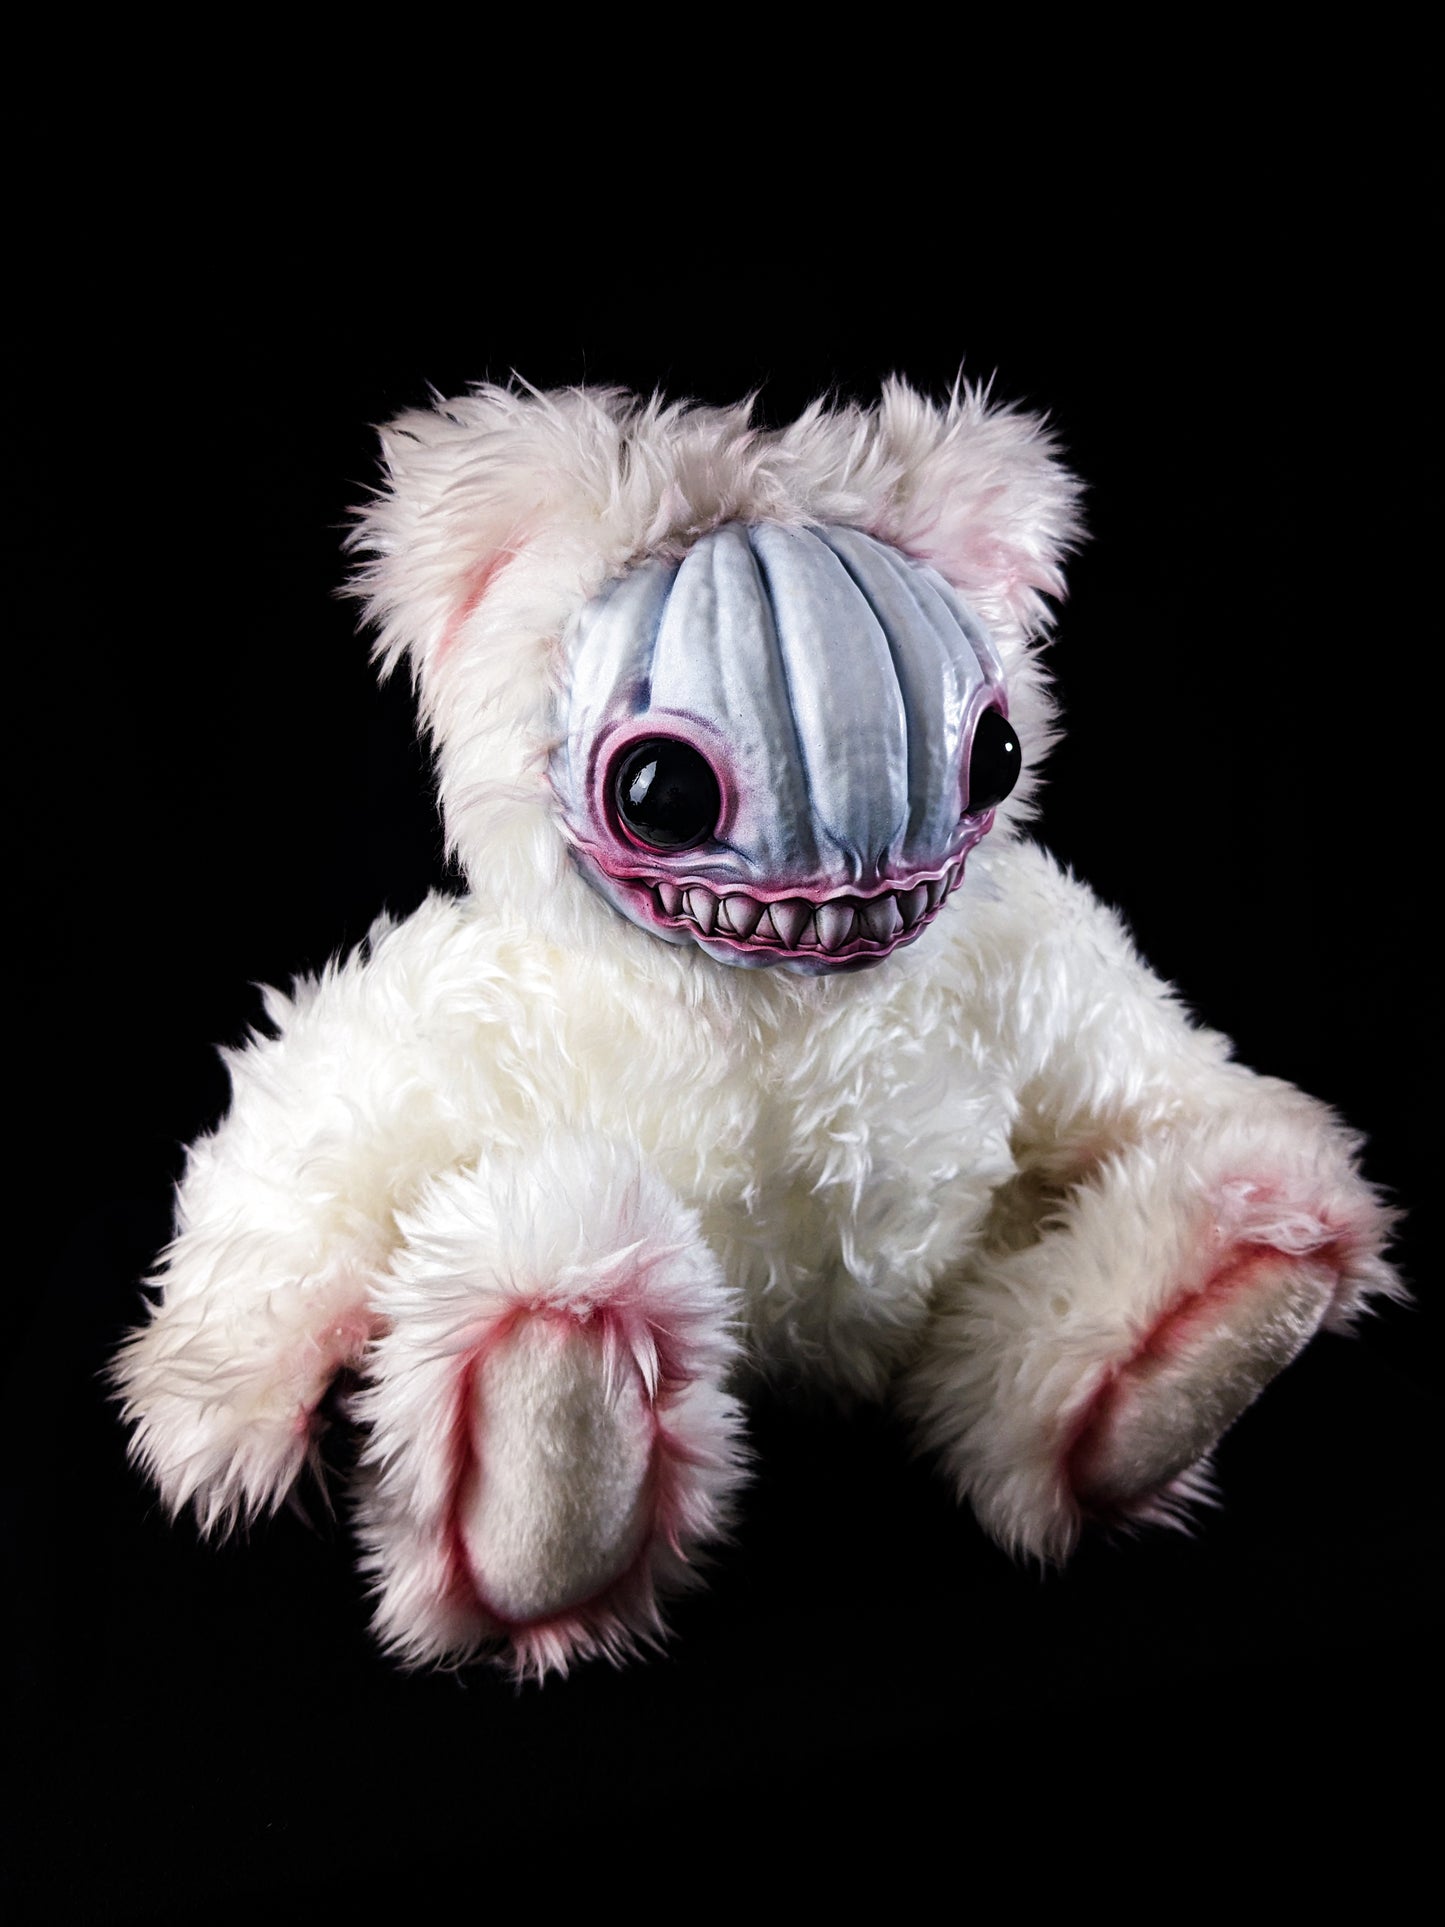 Drained Dweller: HAUNTVESTER - CRYPTCRITZ Handcrafted Creepy Cute Halloween Pumpkin Art Doll Plush Toy for Spooky Souls